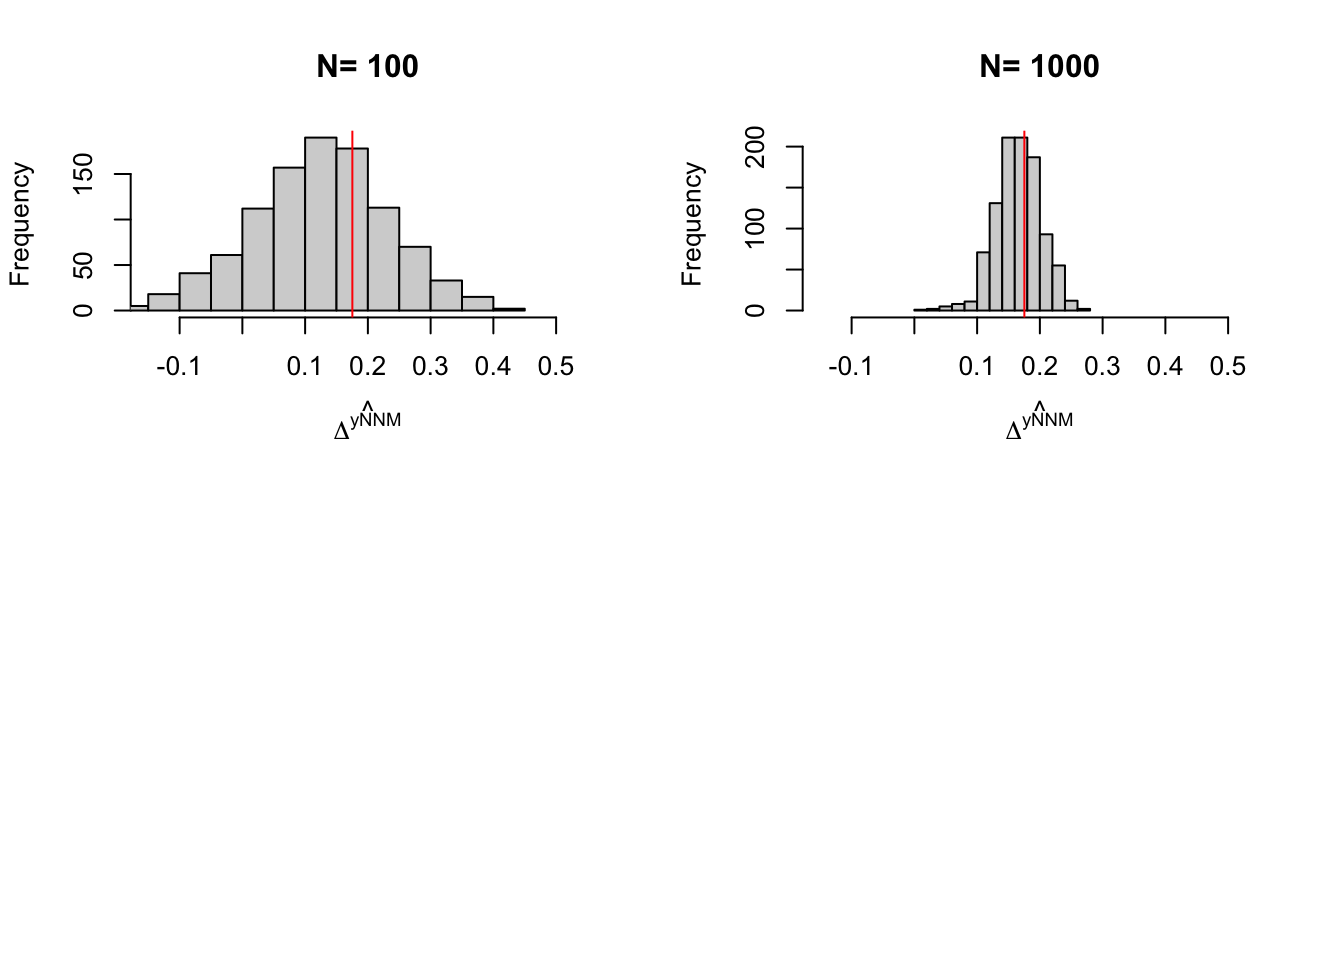 Distribution of the NNM estimator over replications of samples of different sizes